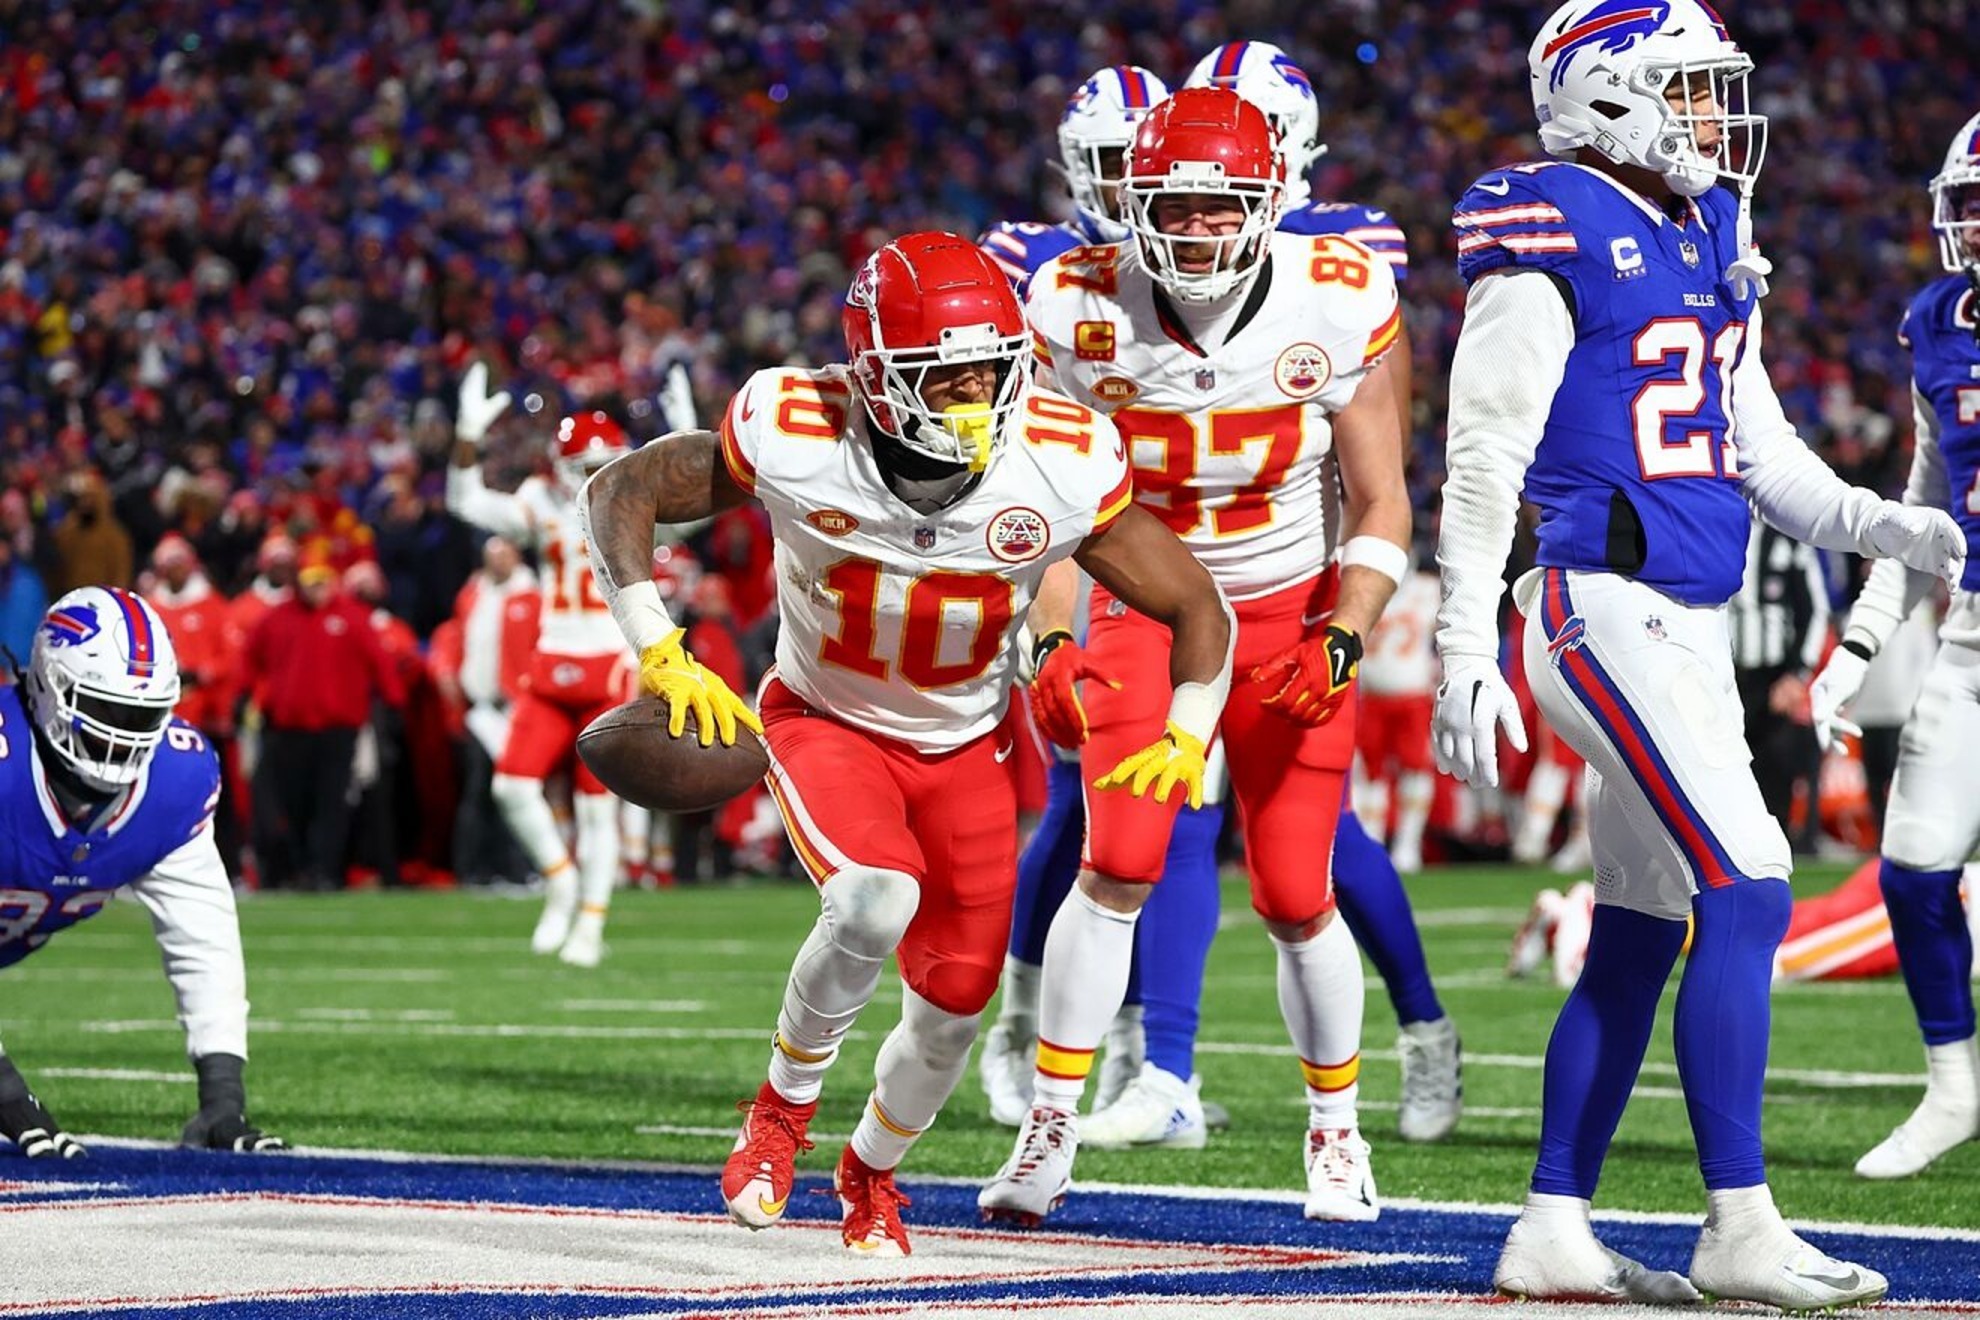 The Chiefs could become the seventh franchise to win back-to-back Super Bowl titles.